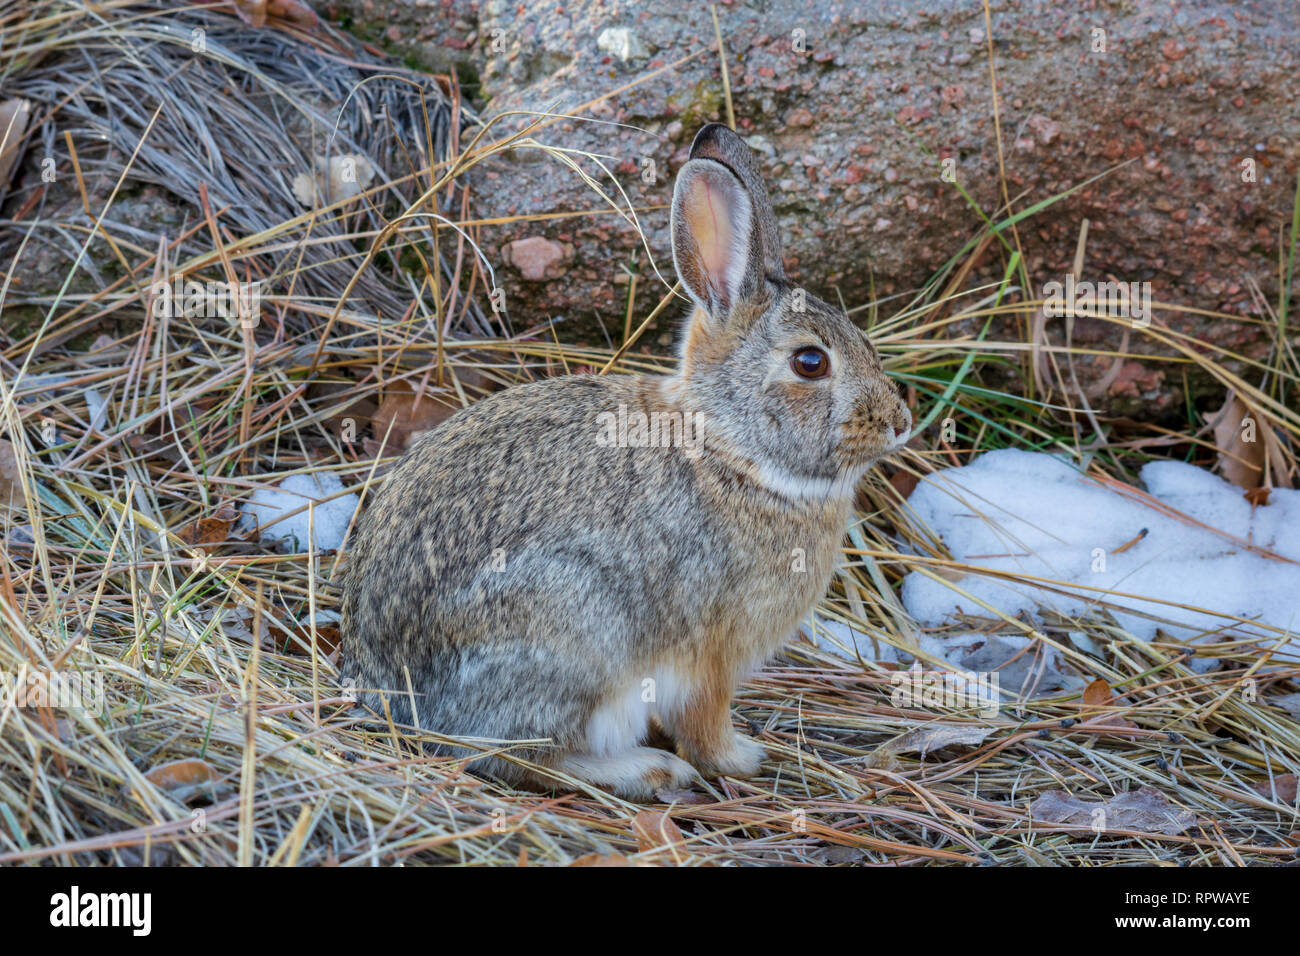 Mountain or Nuttall's Cottontail rabbit (Sylvilagus nuttalli) in winter, Castle Rock Colorado US. Photo taken in February. Stock Photo